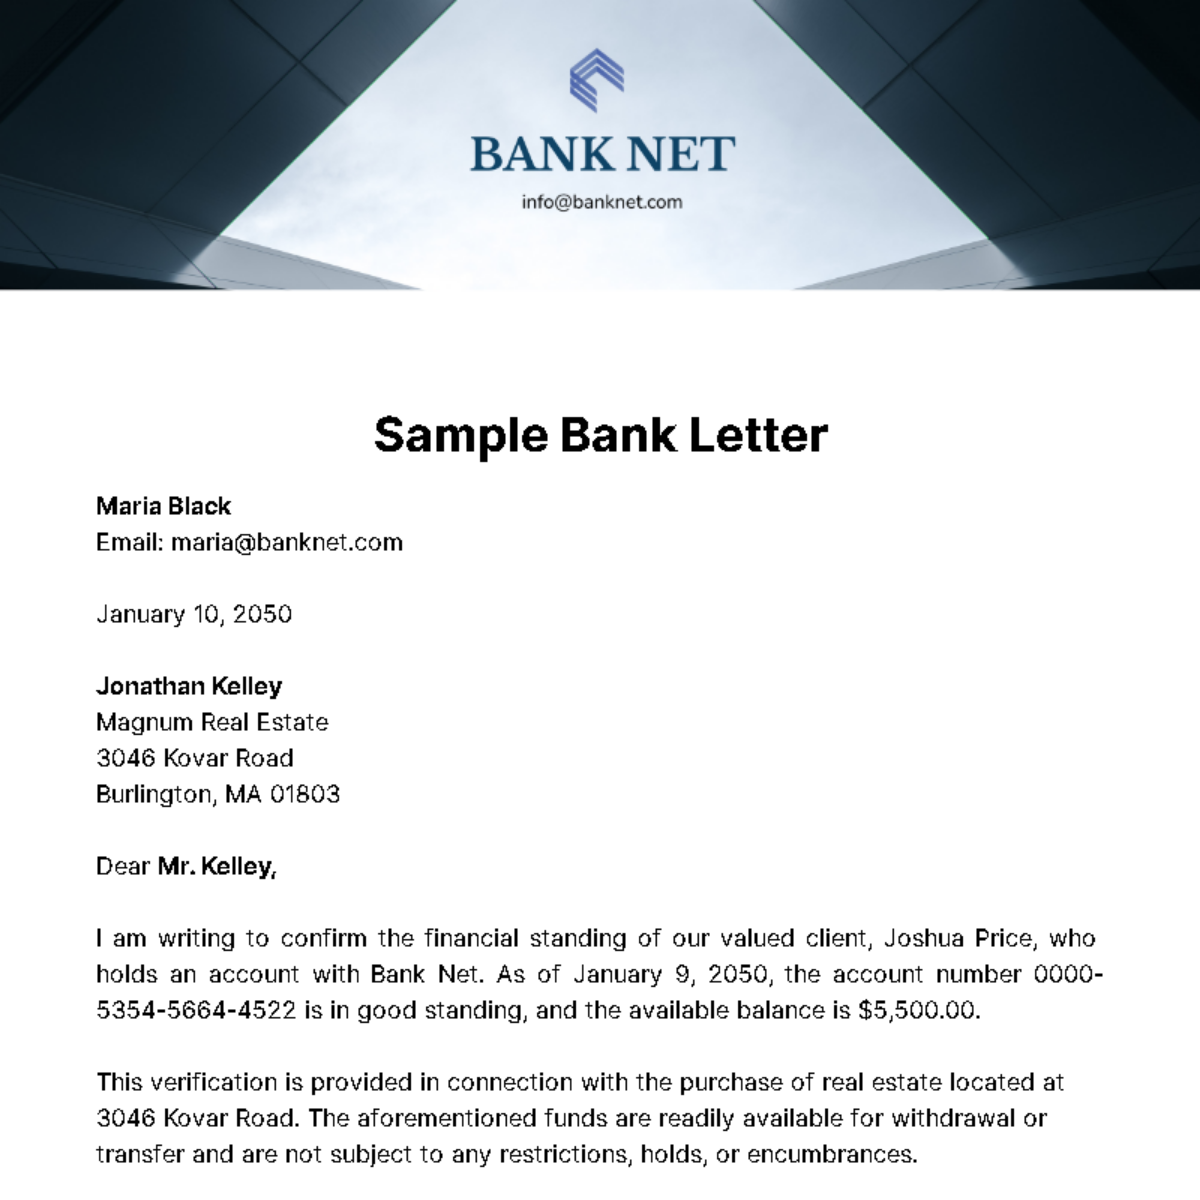 Sample Bank Letter Template - Edit Online & Download Example | Template.net